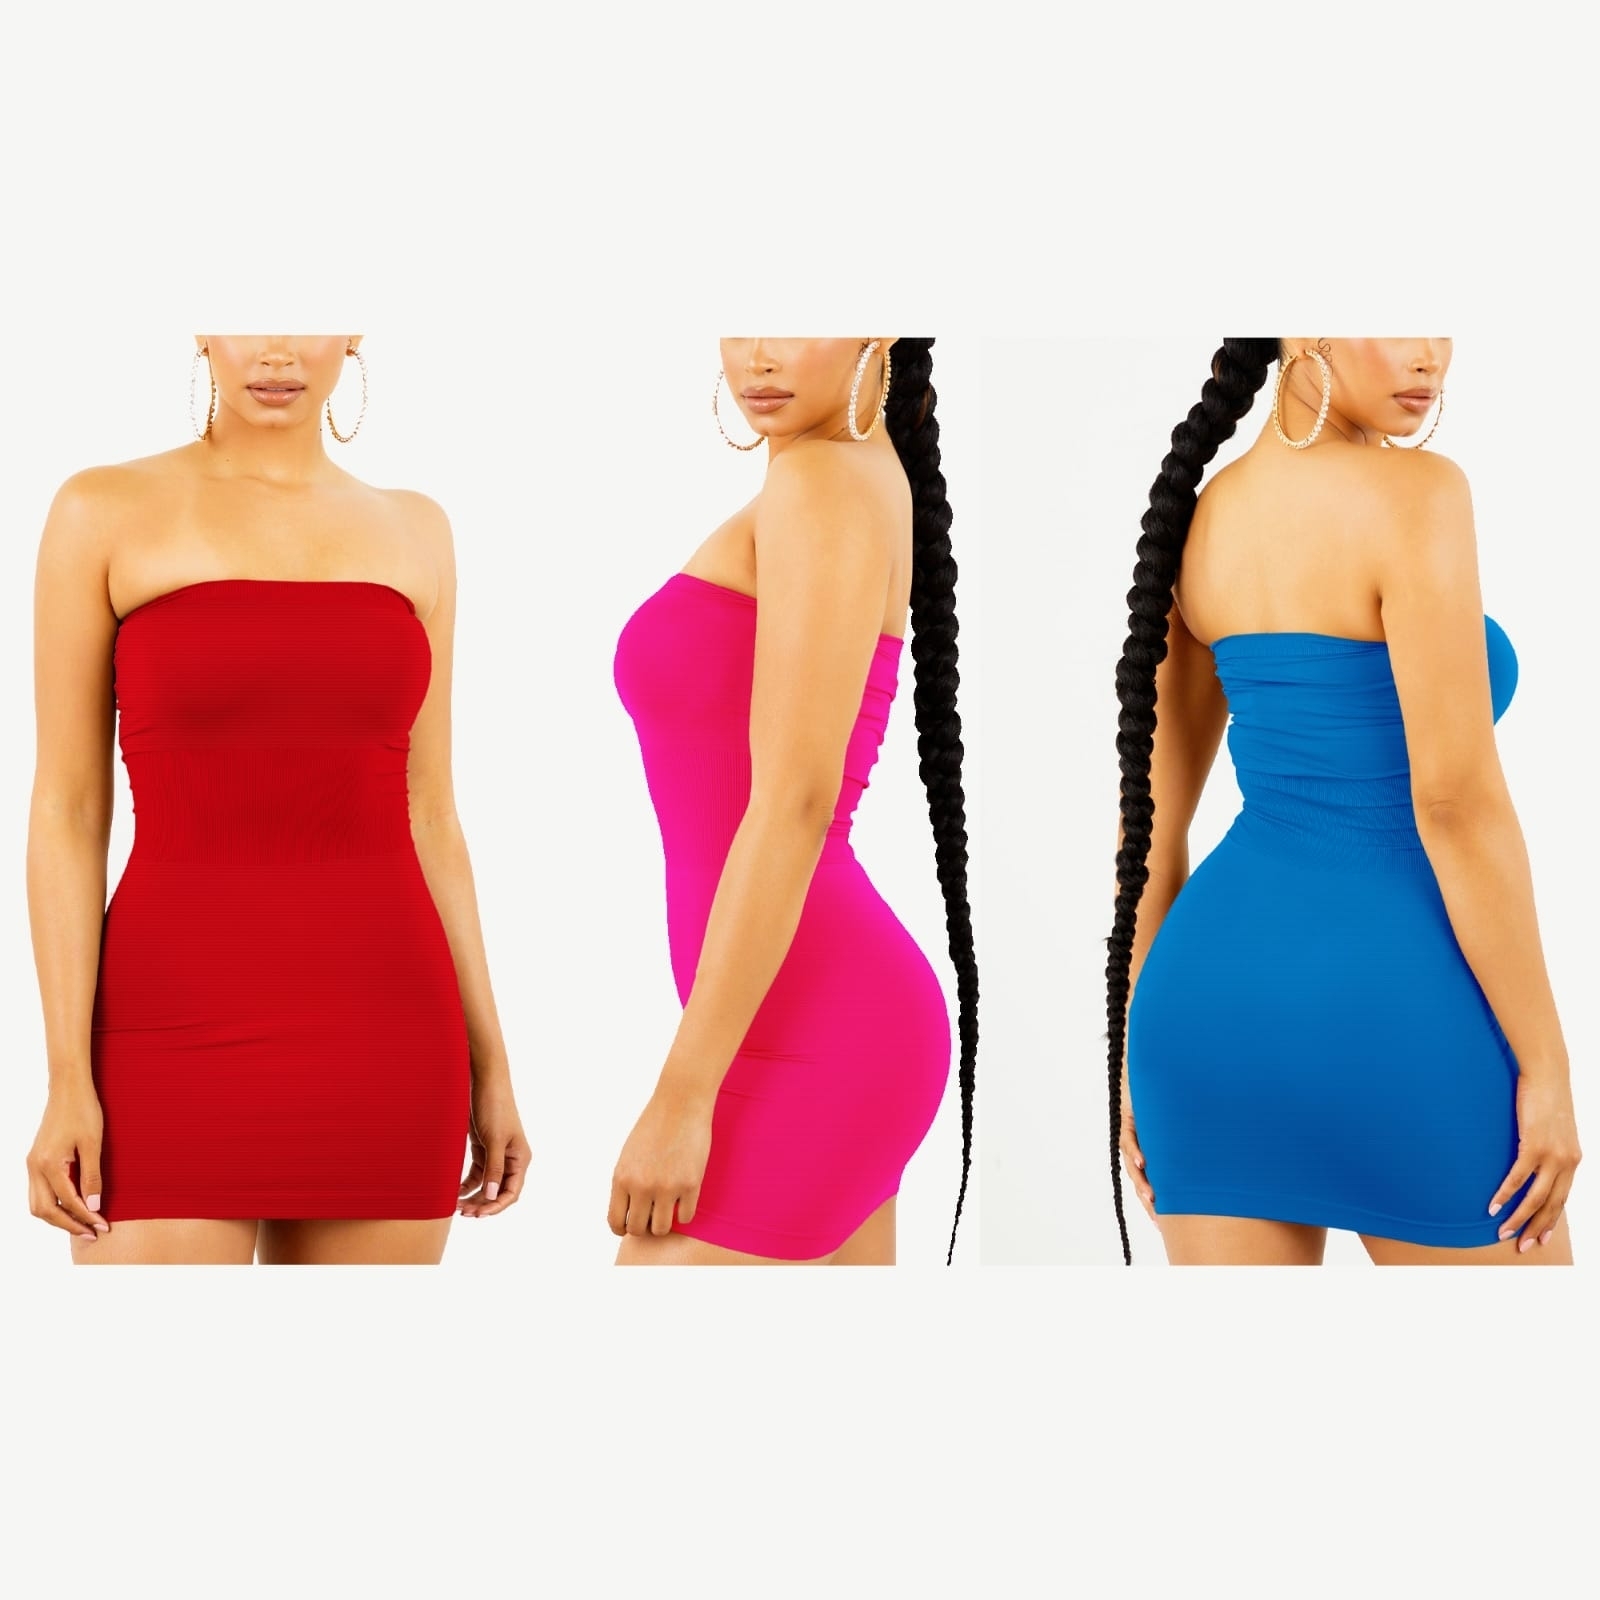 3-Pack Women's Strapless Stretchy Seamless Tight Fit Body Con Mini Tube Top Dress - PINK, L